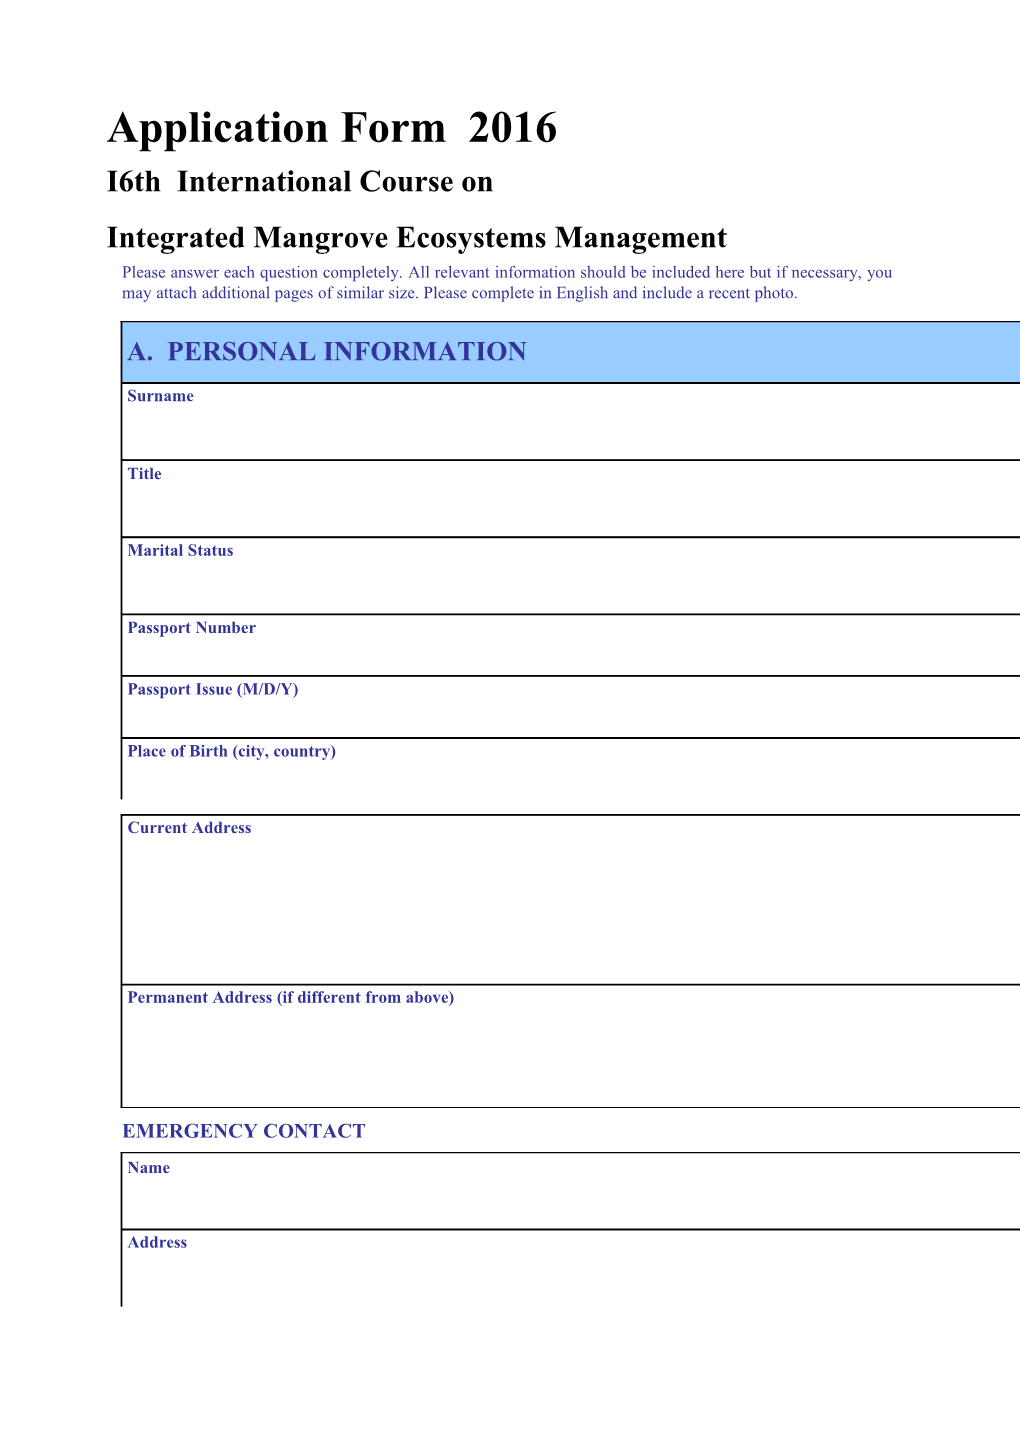 Integrated Mangrove Ecosystems Management